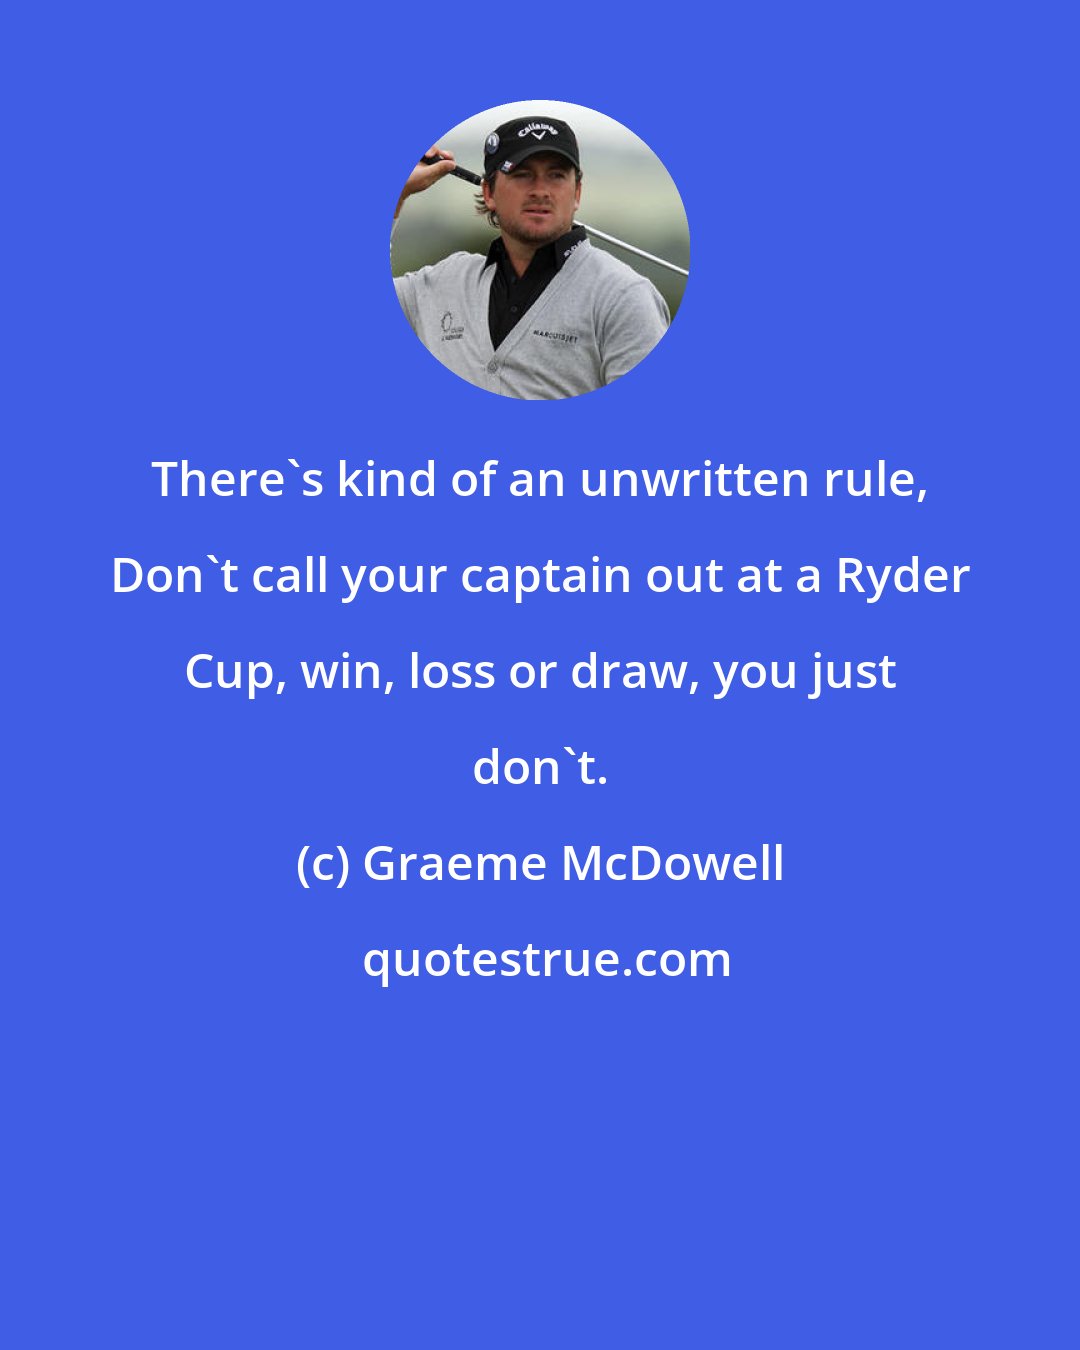 Graeme McDowell: There's kind of an unwritten rule, Don't call your captain out at a Ryder Cup, win, loss or draw, you just don't.